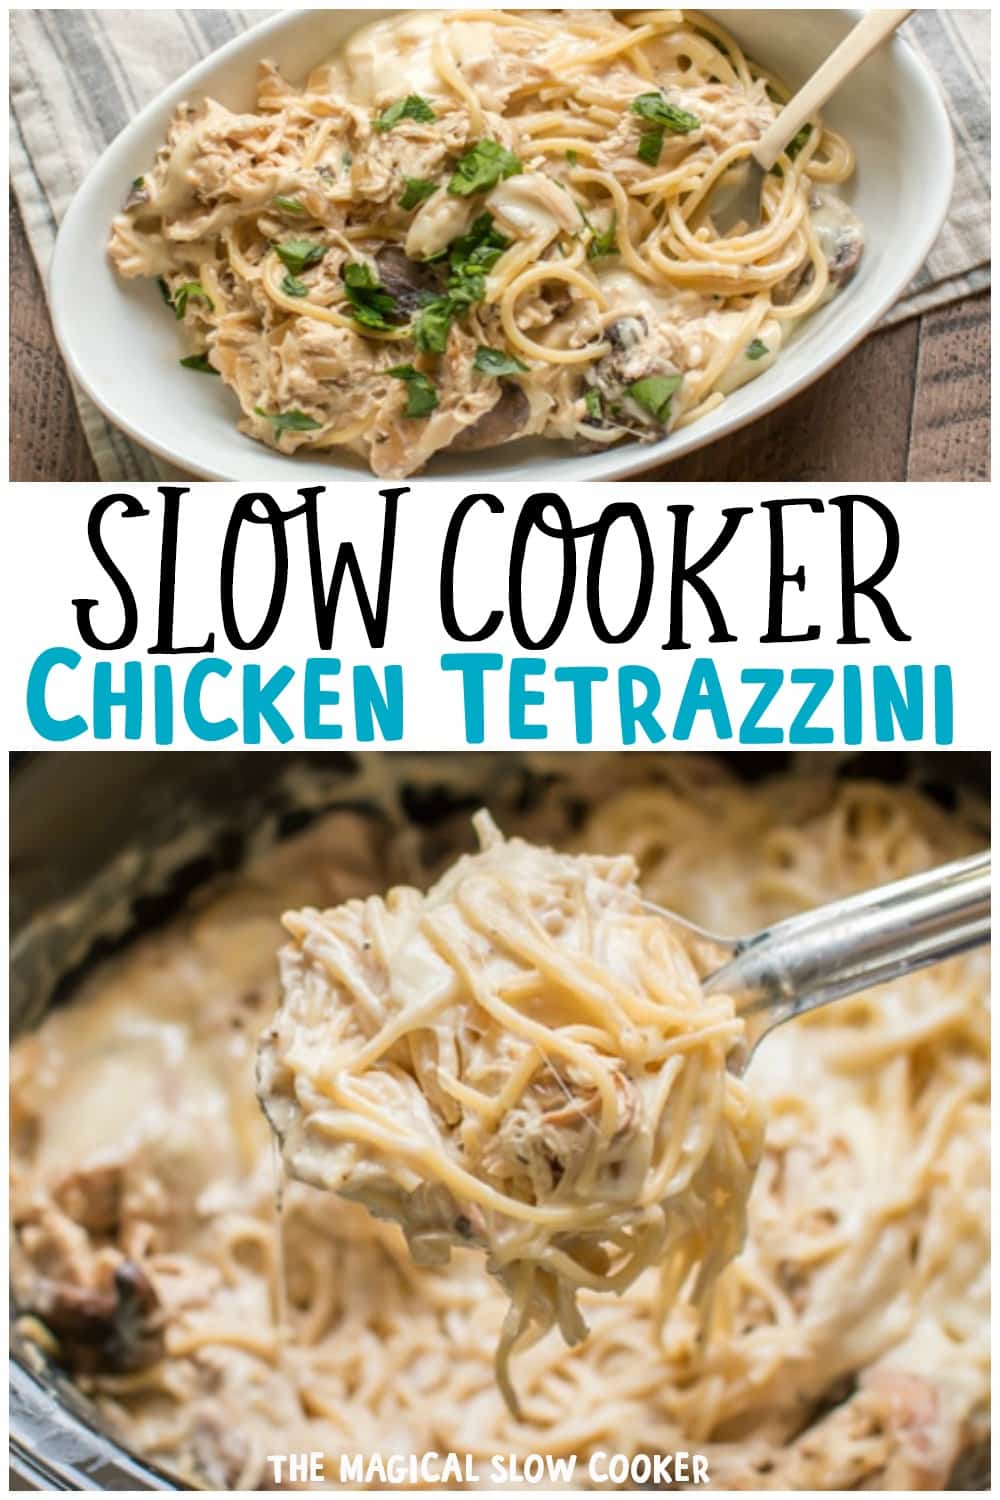 Slow Cooker Chicken Tetrazzini - The Magical Slow Cooker